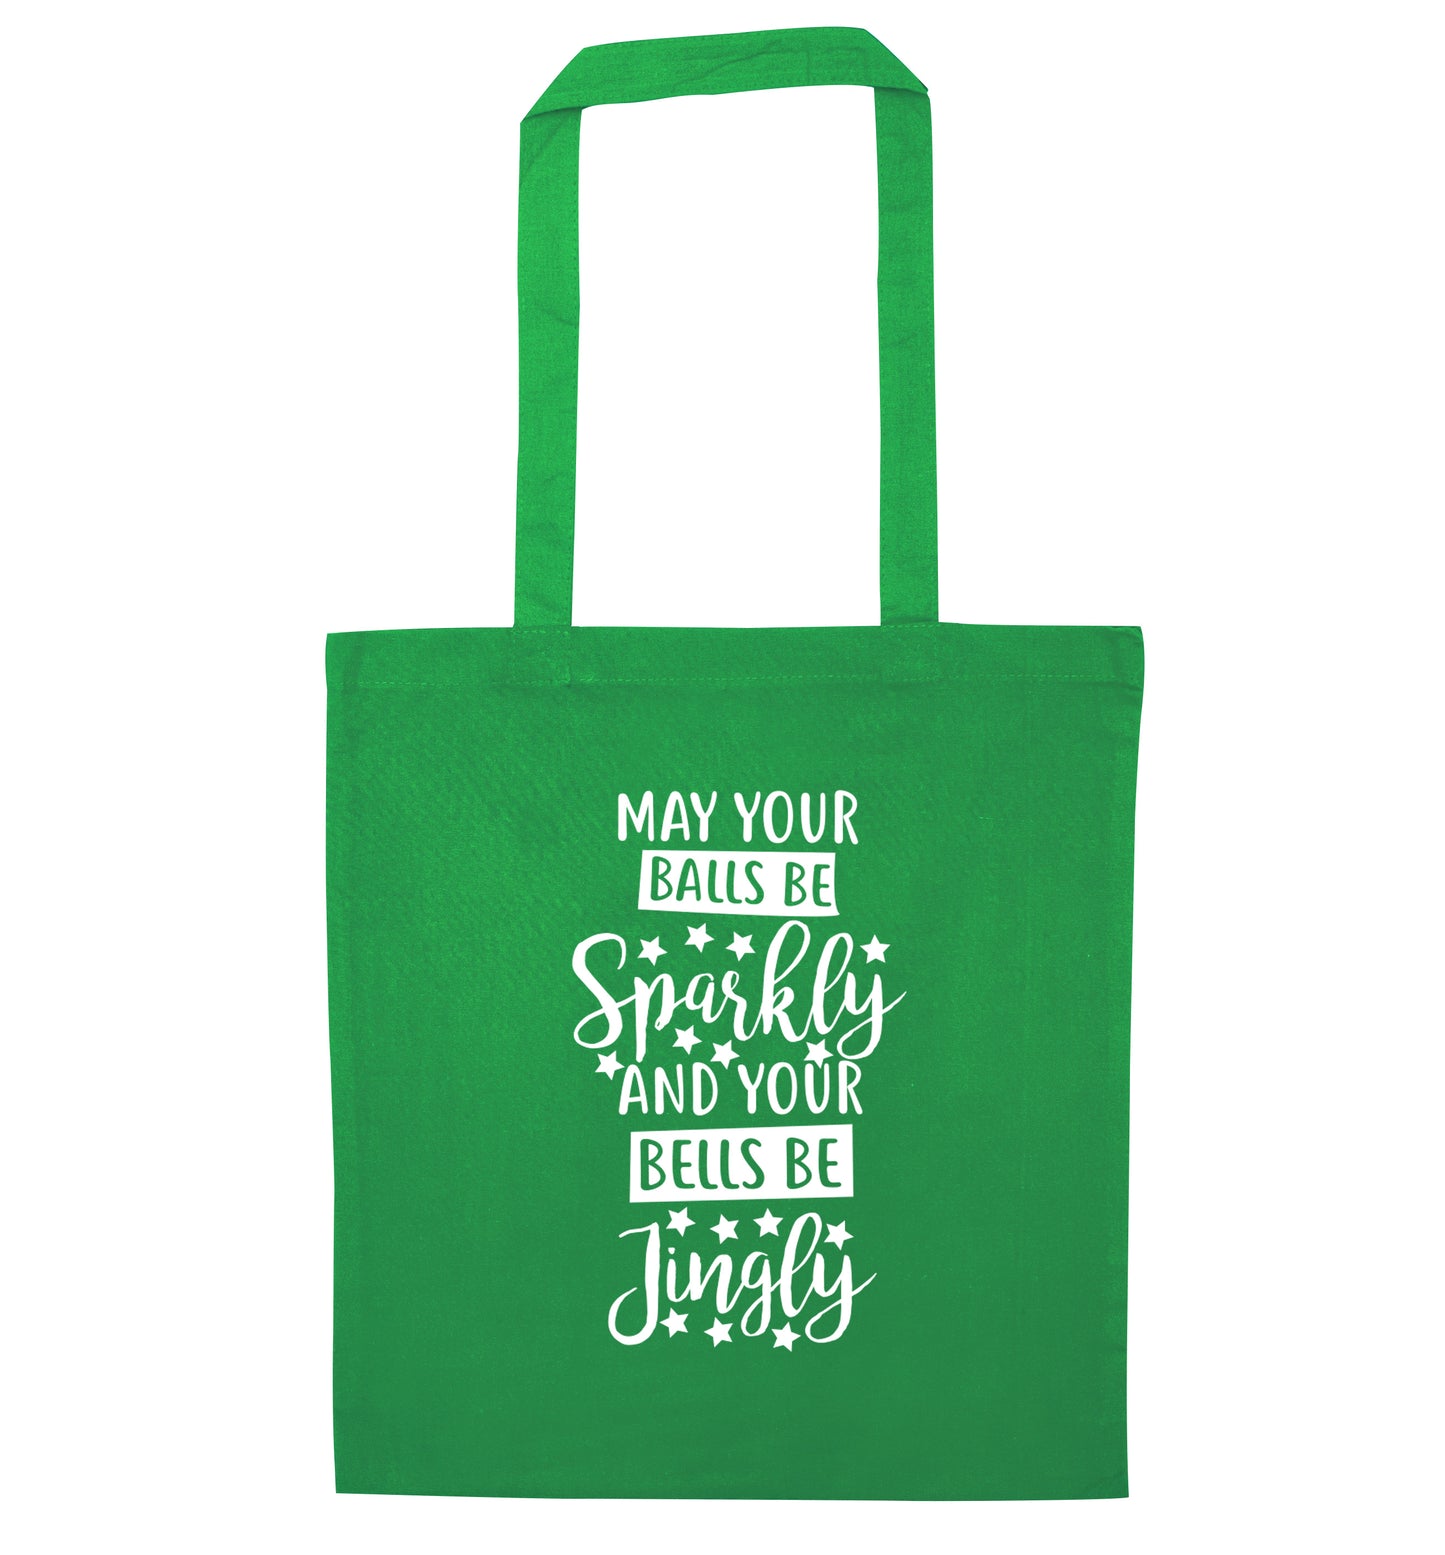 May your balls be sparkly and your bells be jingly green tote bag